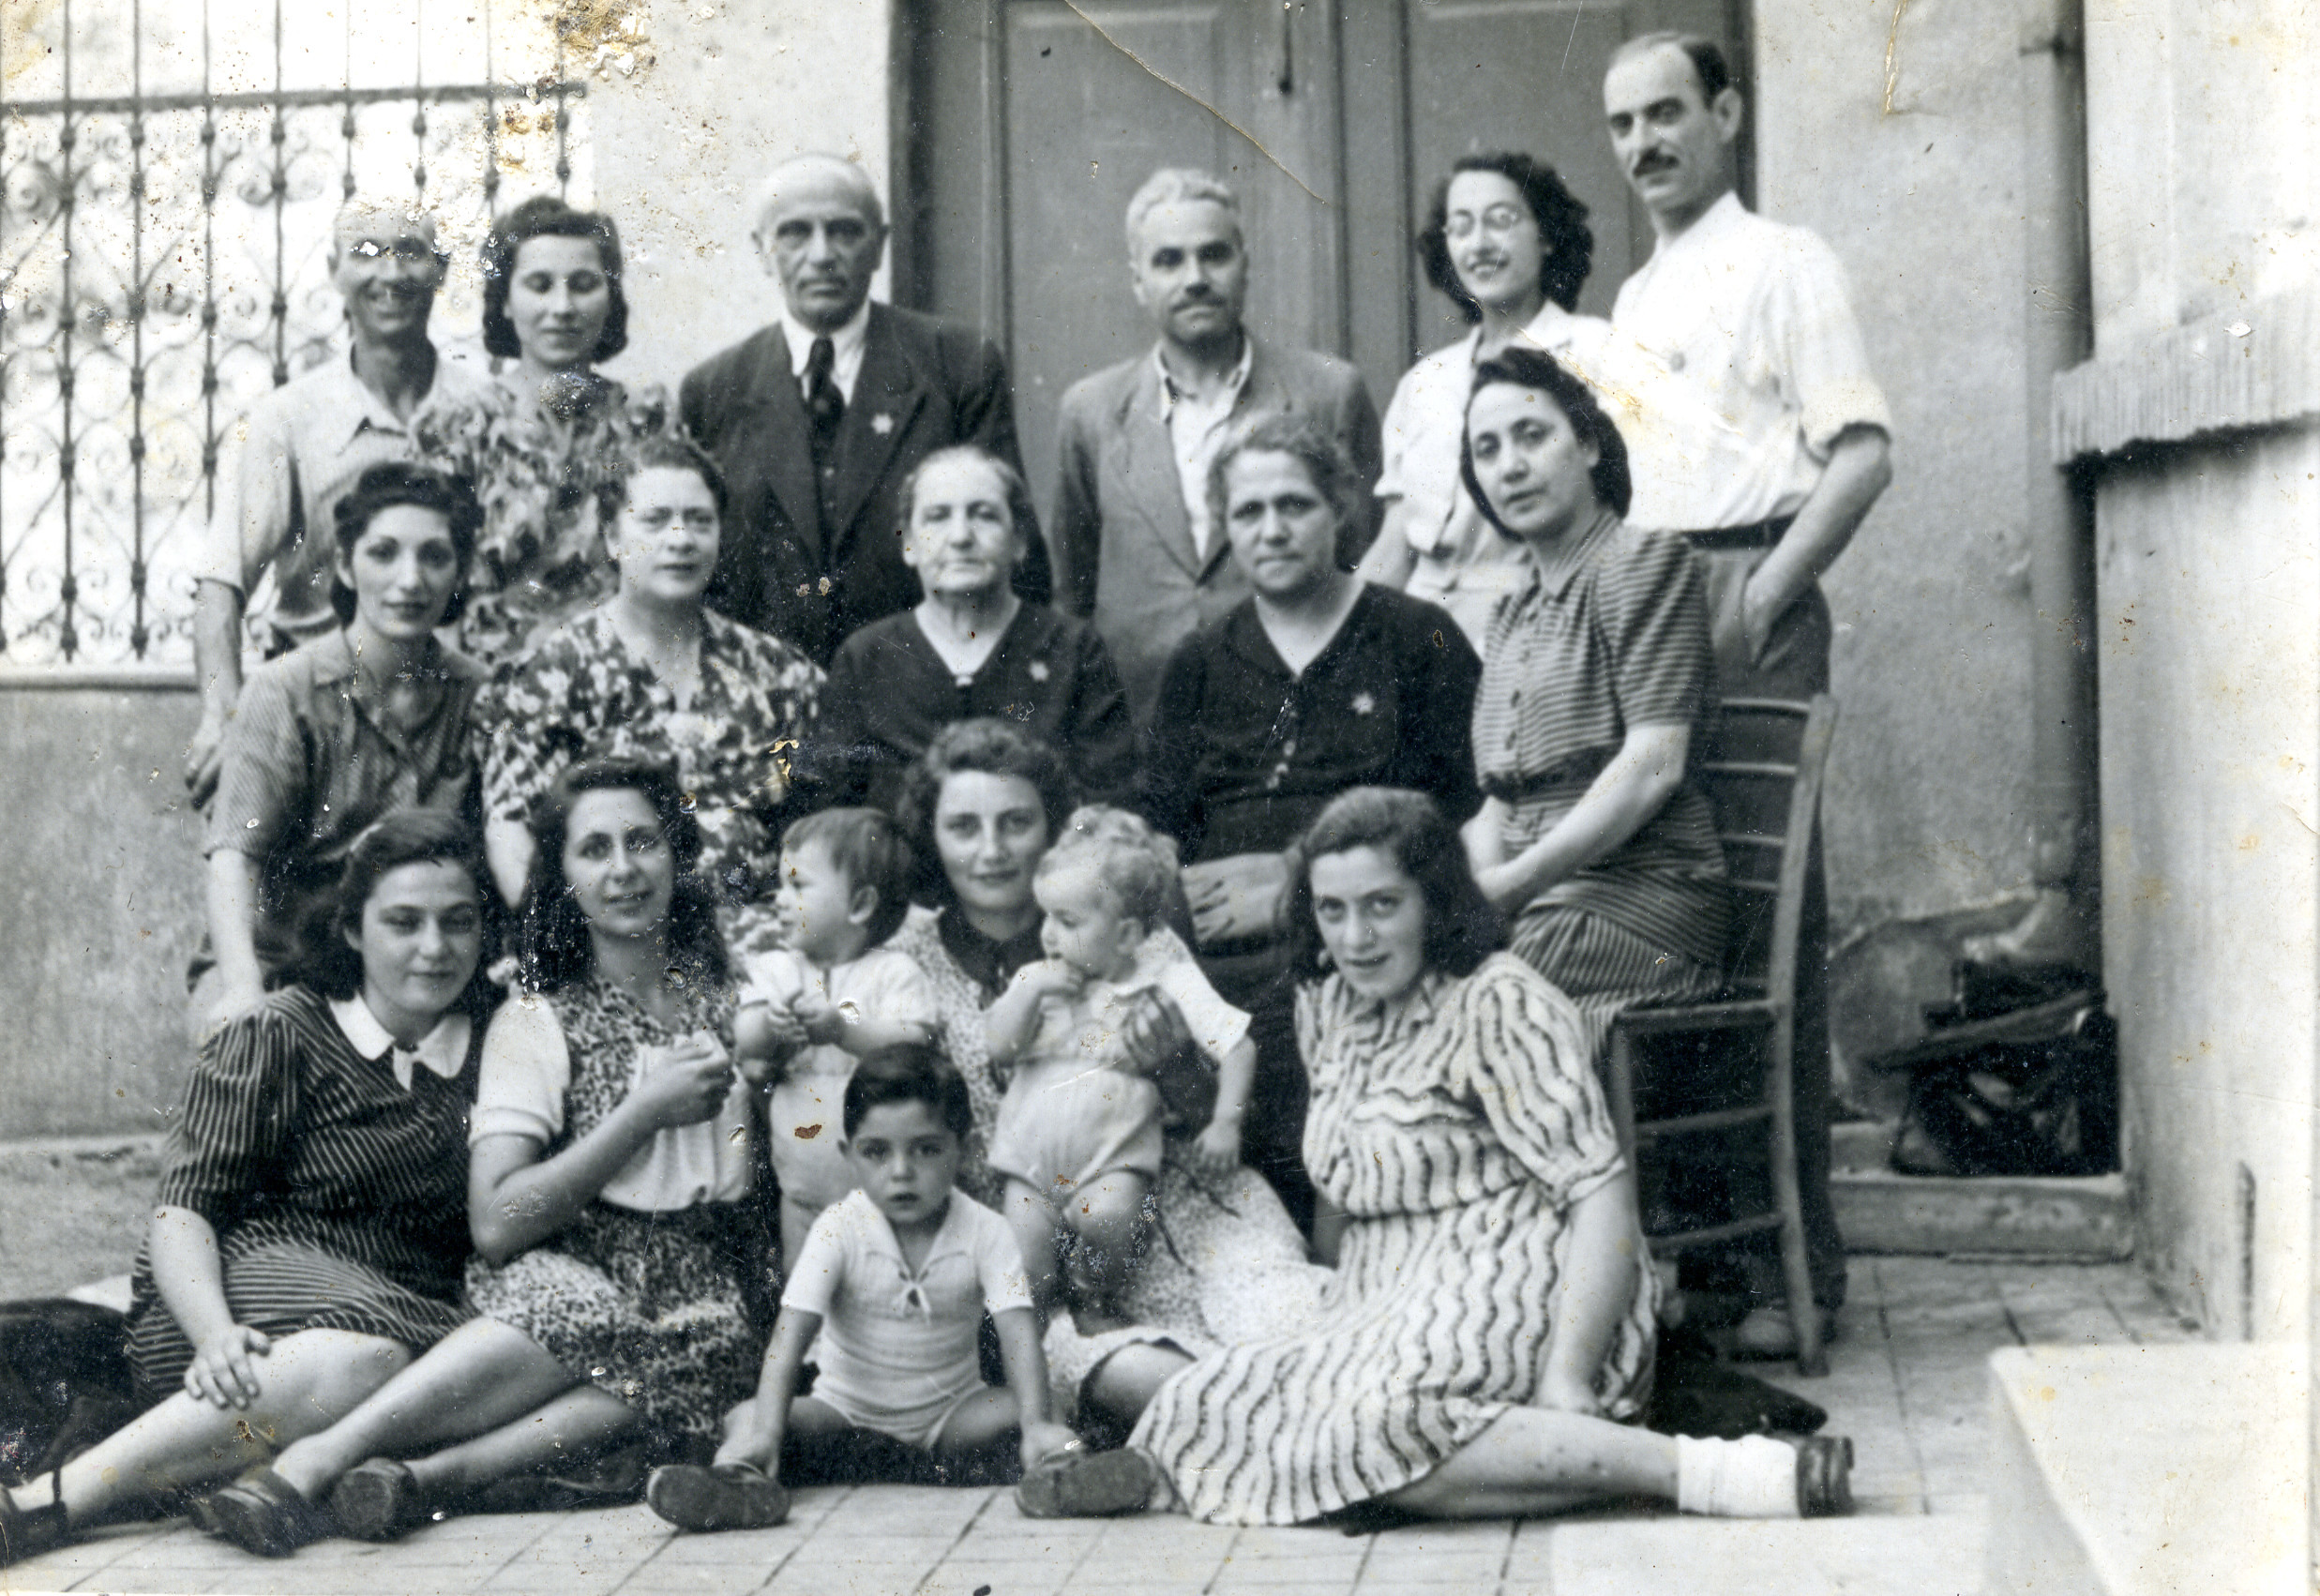 Group portrait of Jewish family members and neighbors after their expulsion from Sofia, in front of their house on Yumach street in Haskovo.

Among those pictured is Lore Beracha (seated in front, second from the left). Seated in the second row is her mother, Rashel (second from the right), and her best friend Lucy (far left).  The landlord, Abraham Yago, is standing in the back row, third from the right; his wife Mrs Yago is seated in the middle row, far right.  The other people pictured are neighbors.